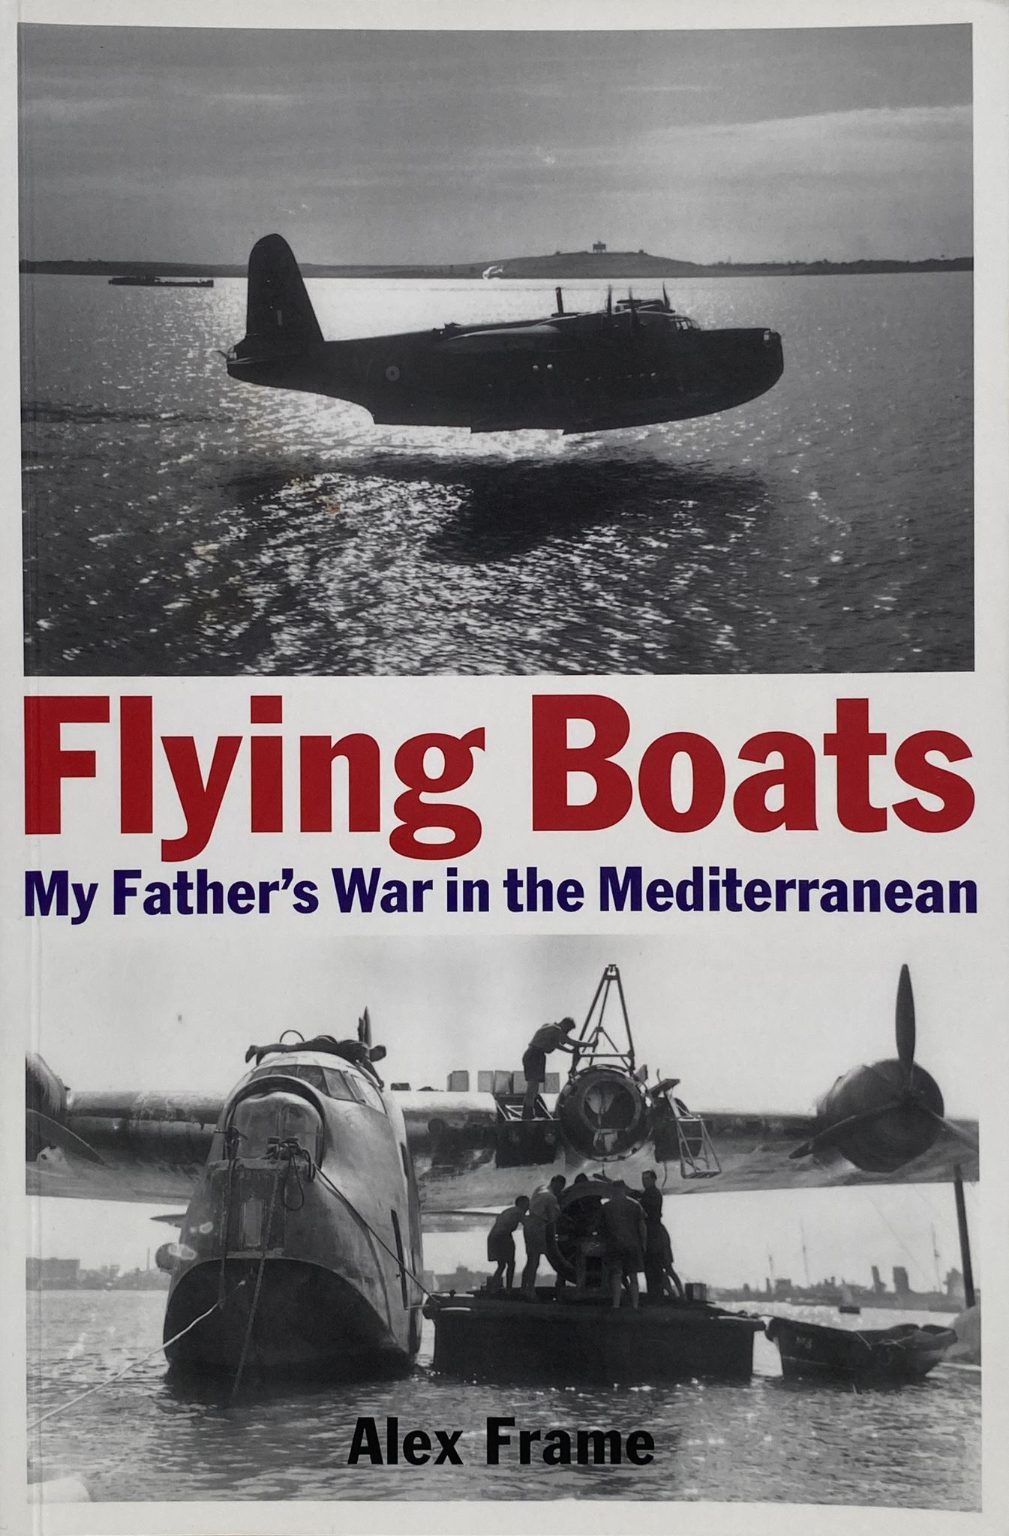 FLYING BOATS: My Father's War in the Mediterranean